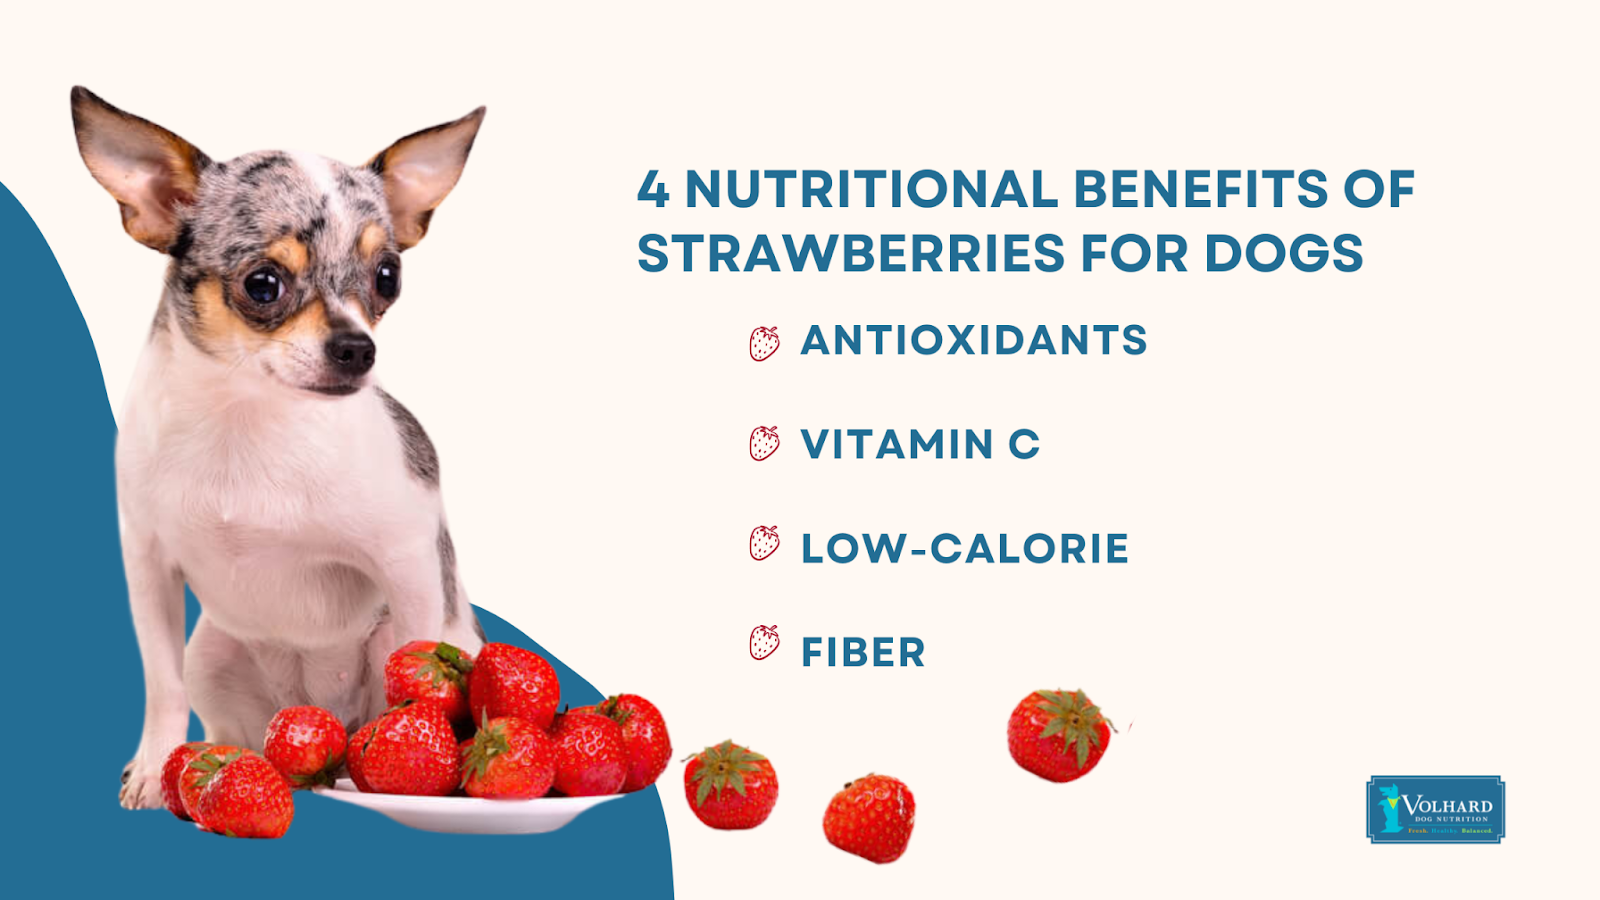 Nutritional benefits of strawberries for dogs